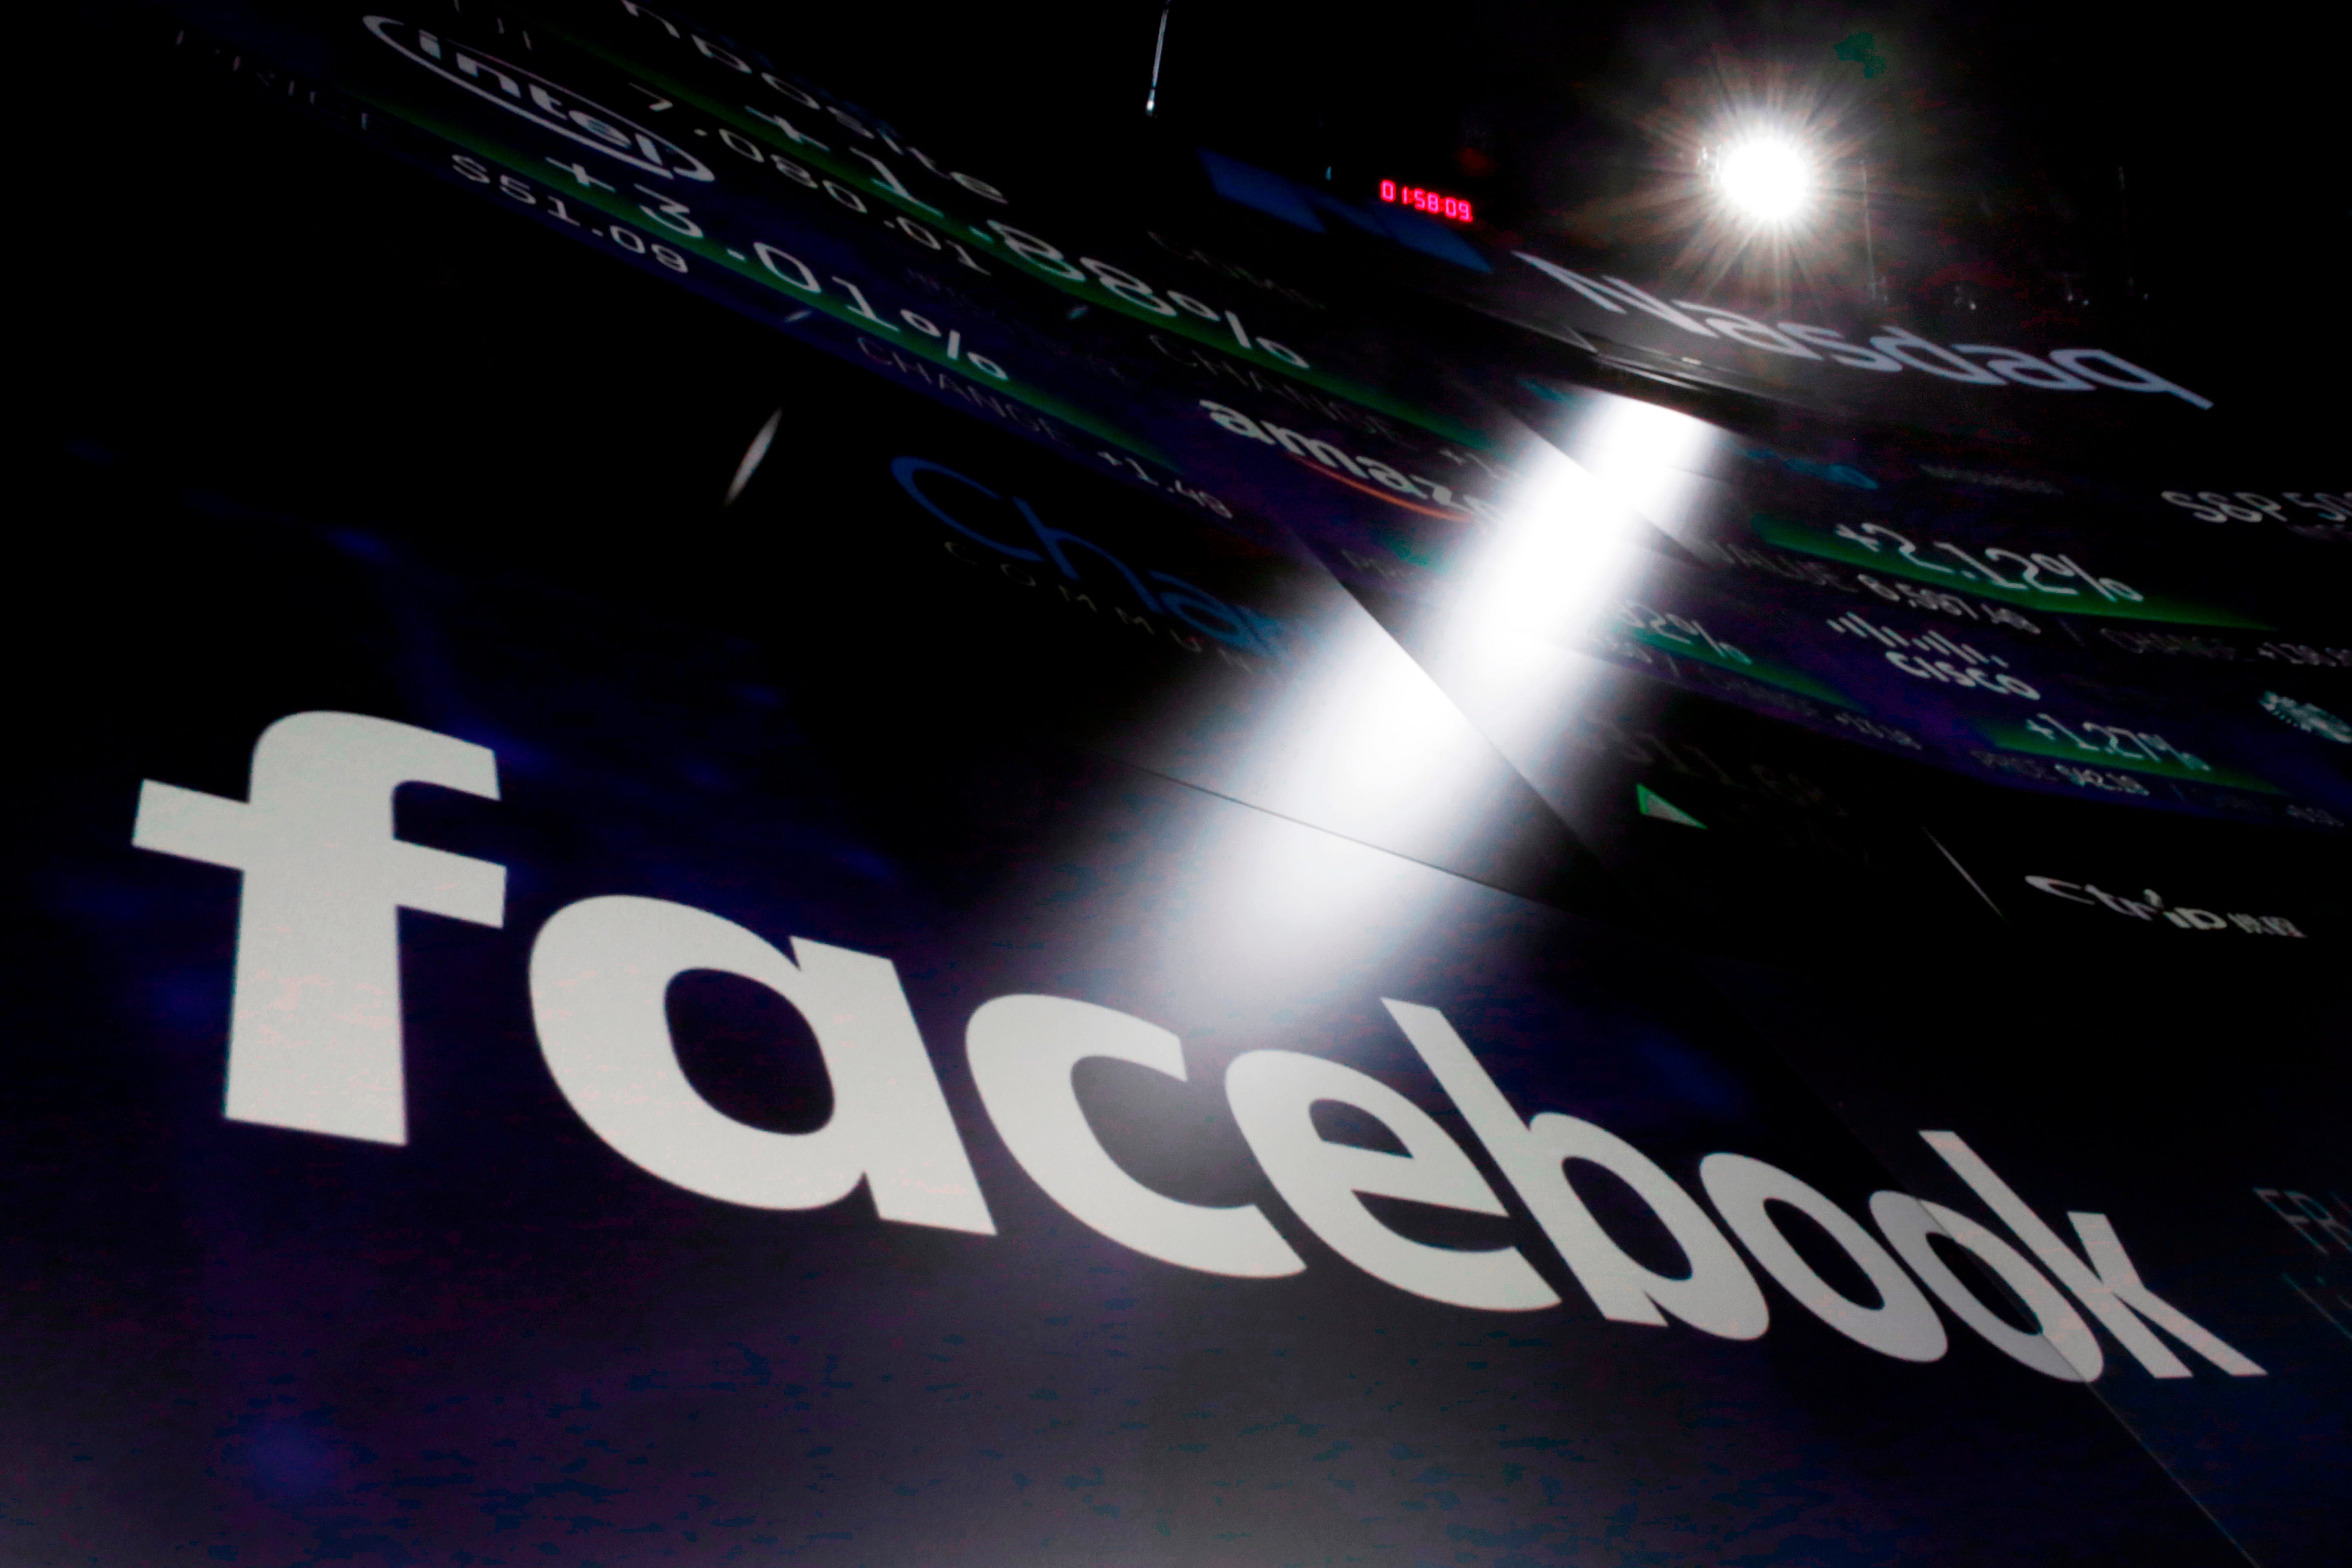 Are Facebook job ads discriminatory? Company accused of bias against women, older workers